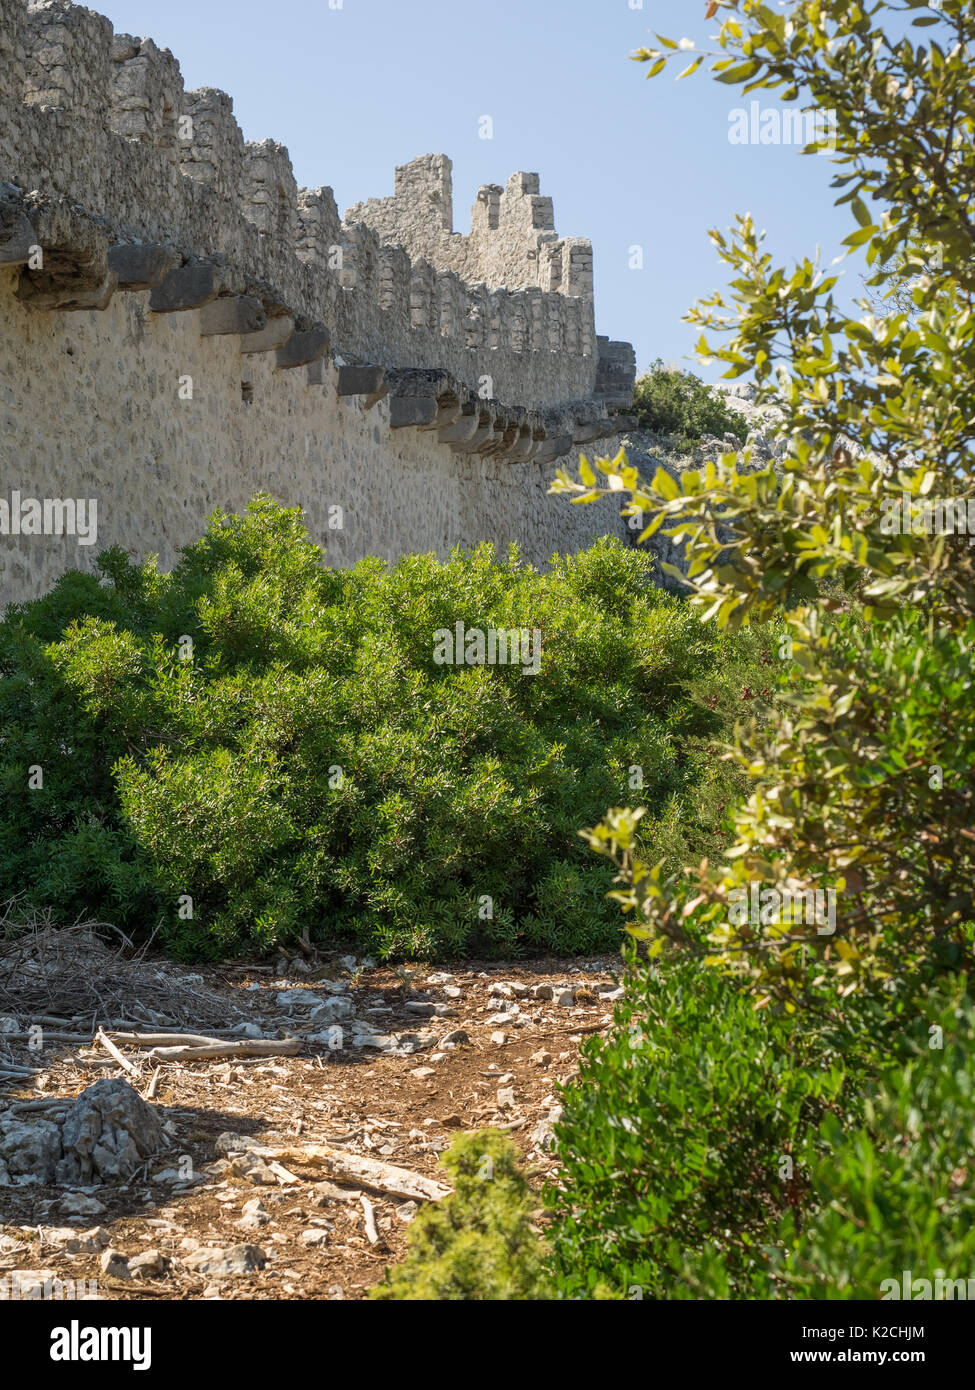 a view of an ancient stone wall ruins with battlements and ramparts surrounded by woods forest trees Croatian coastline clear blue sky Stock Photo